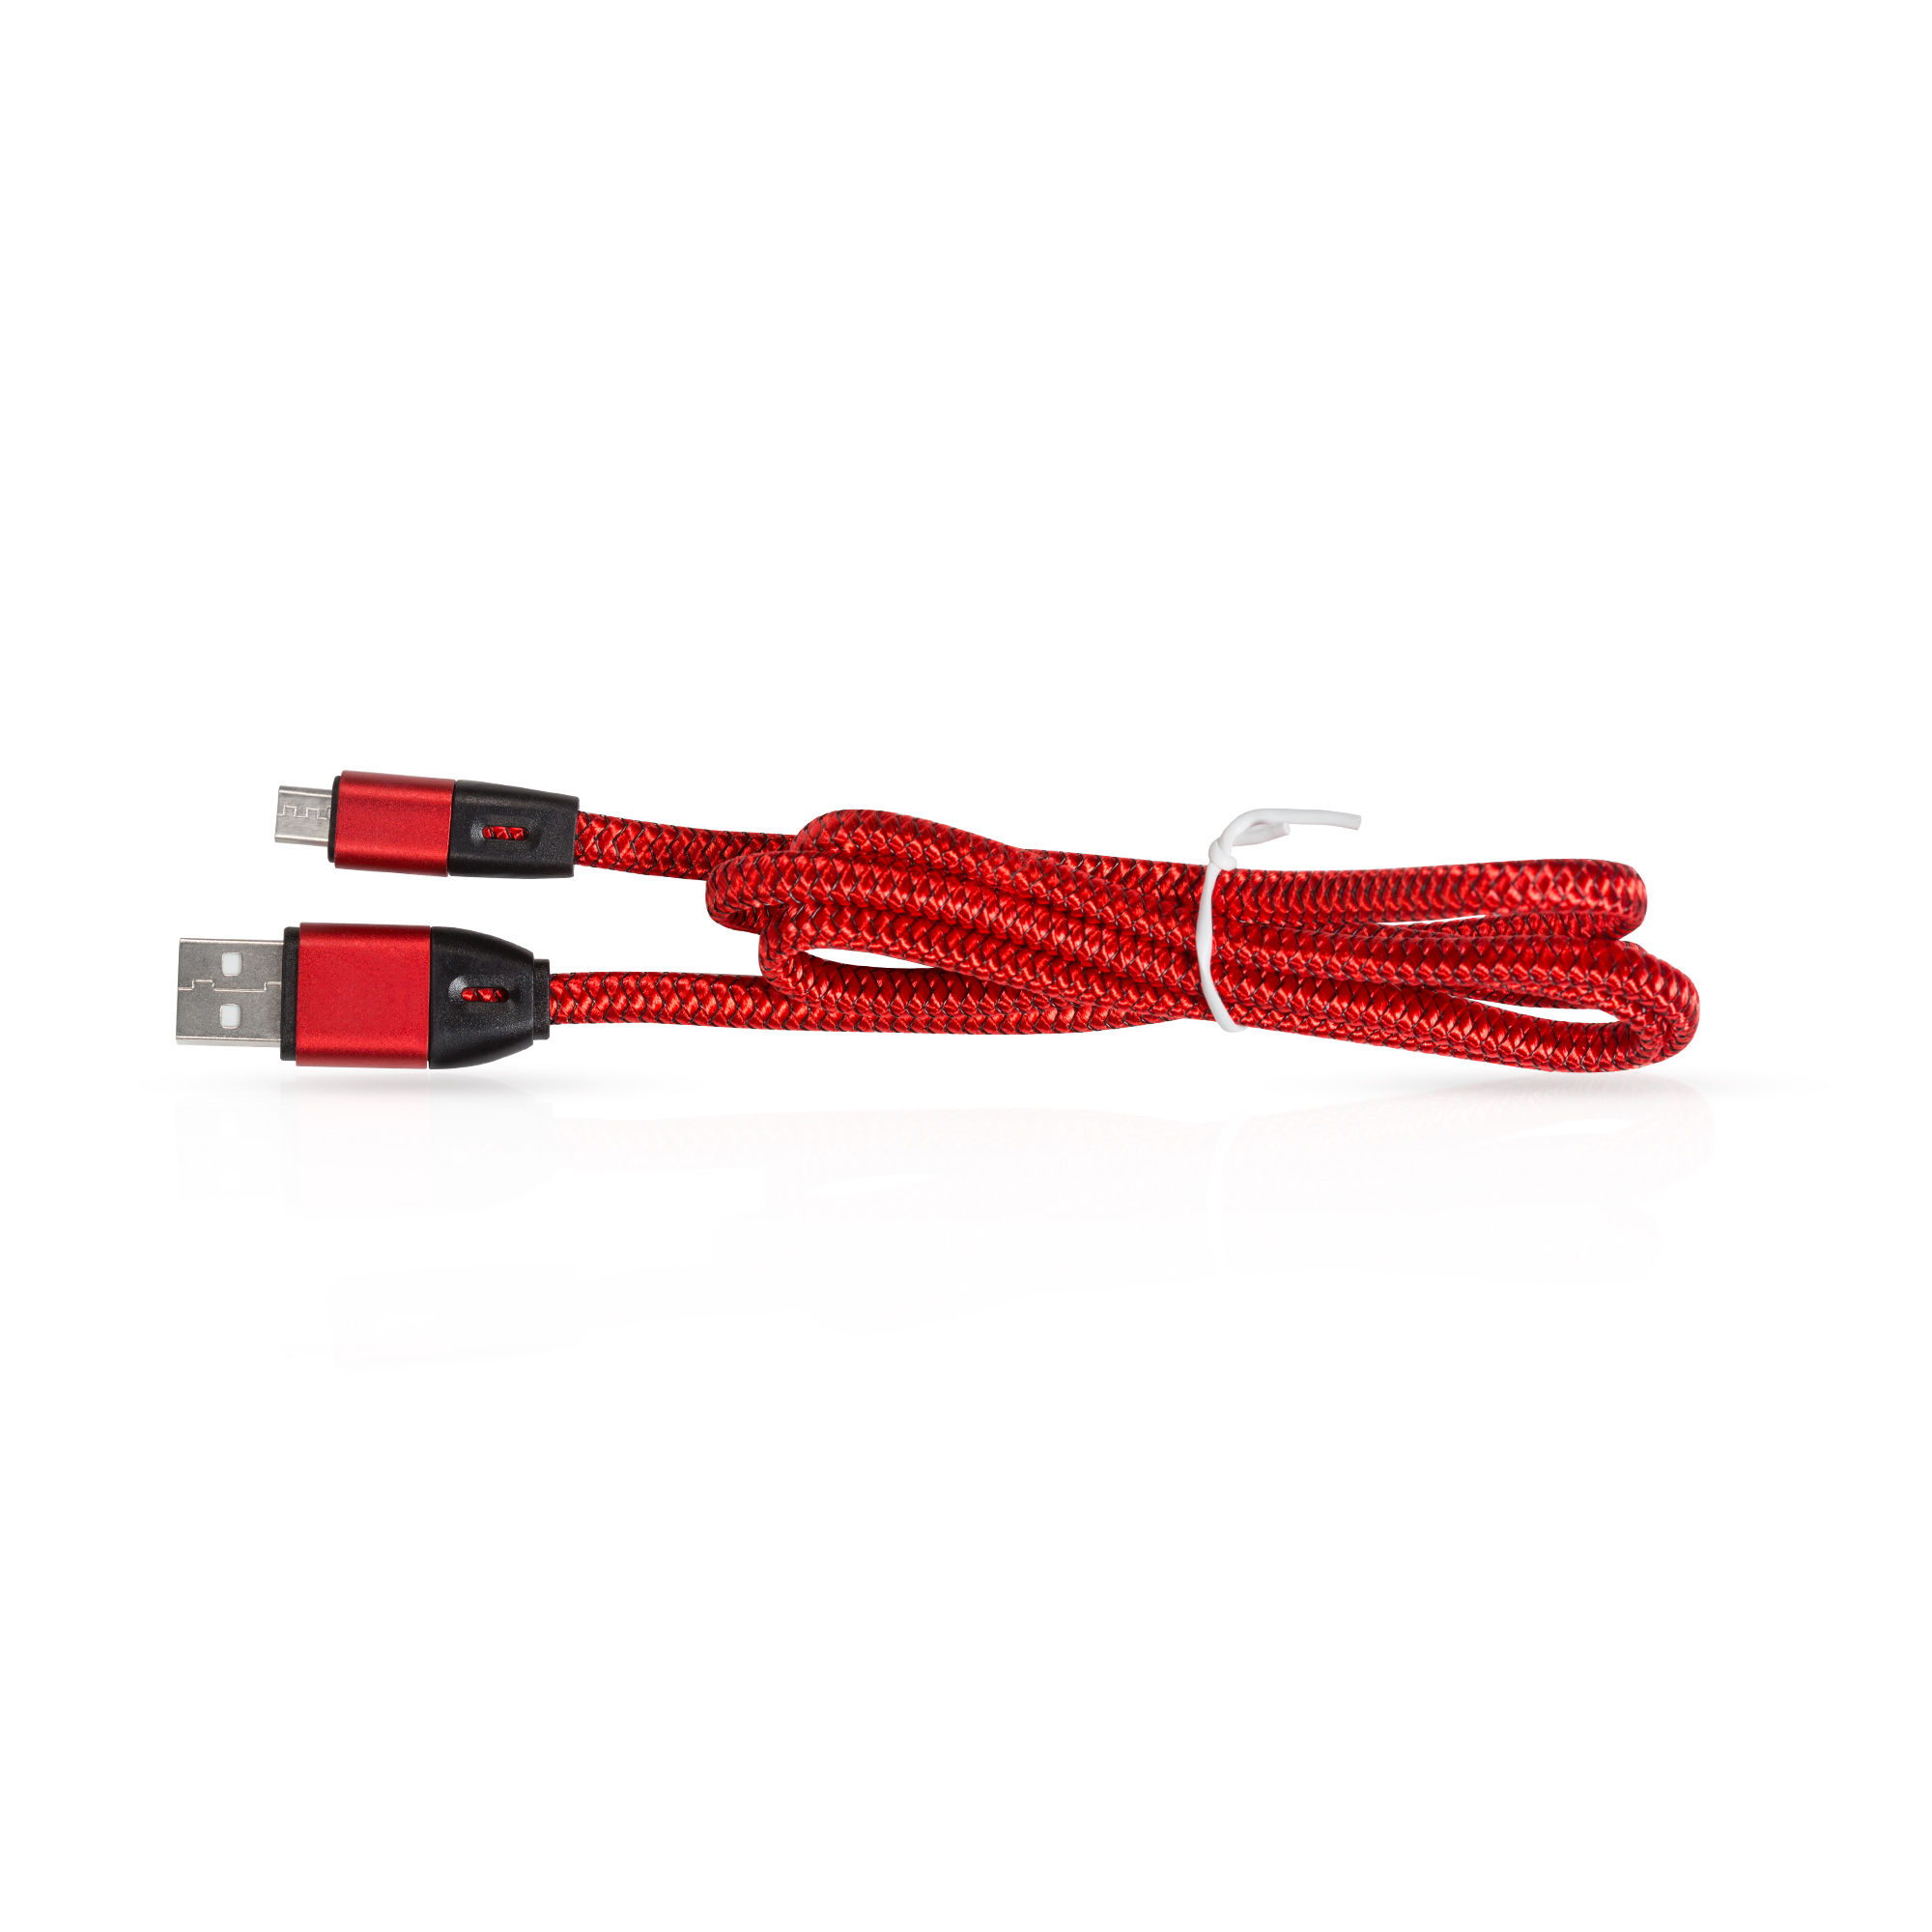 Extra Strong Data Cable (V8)